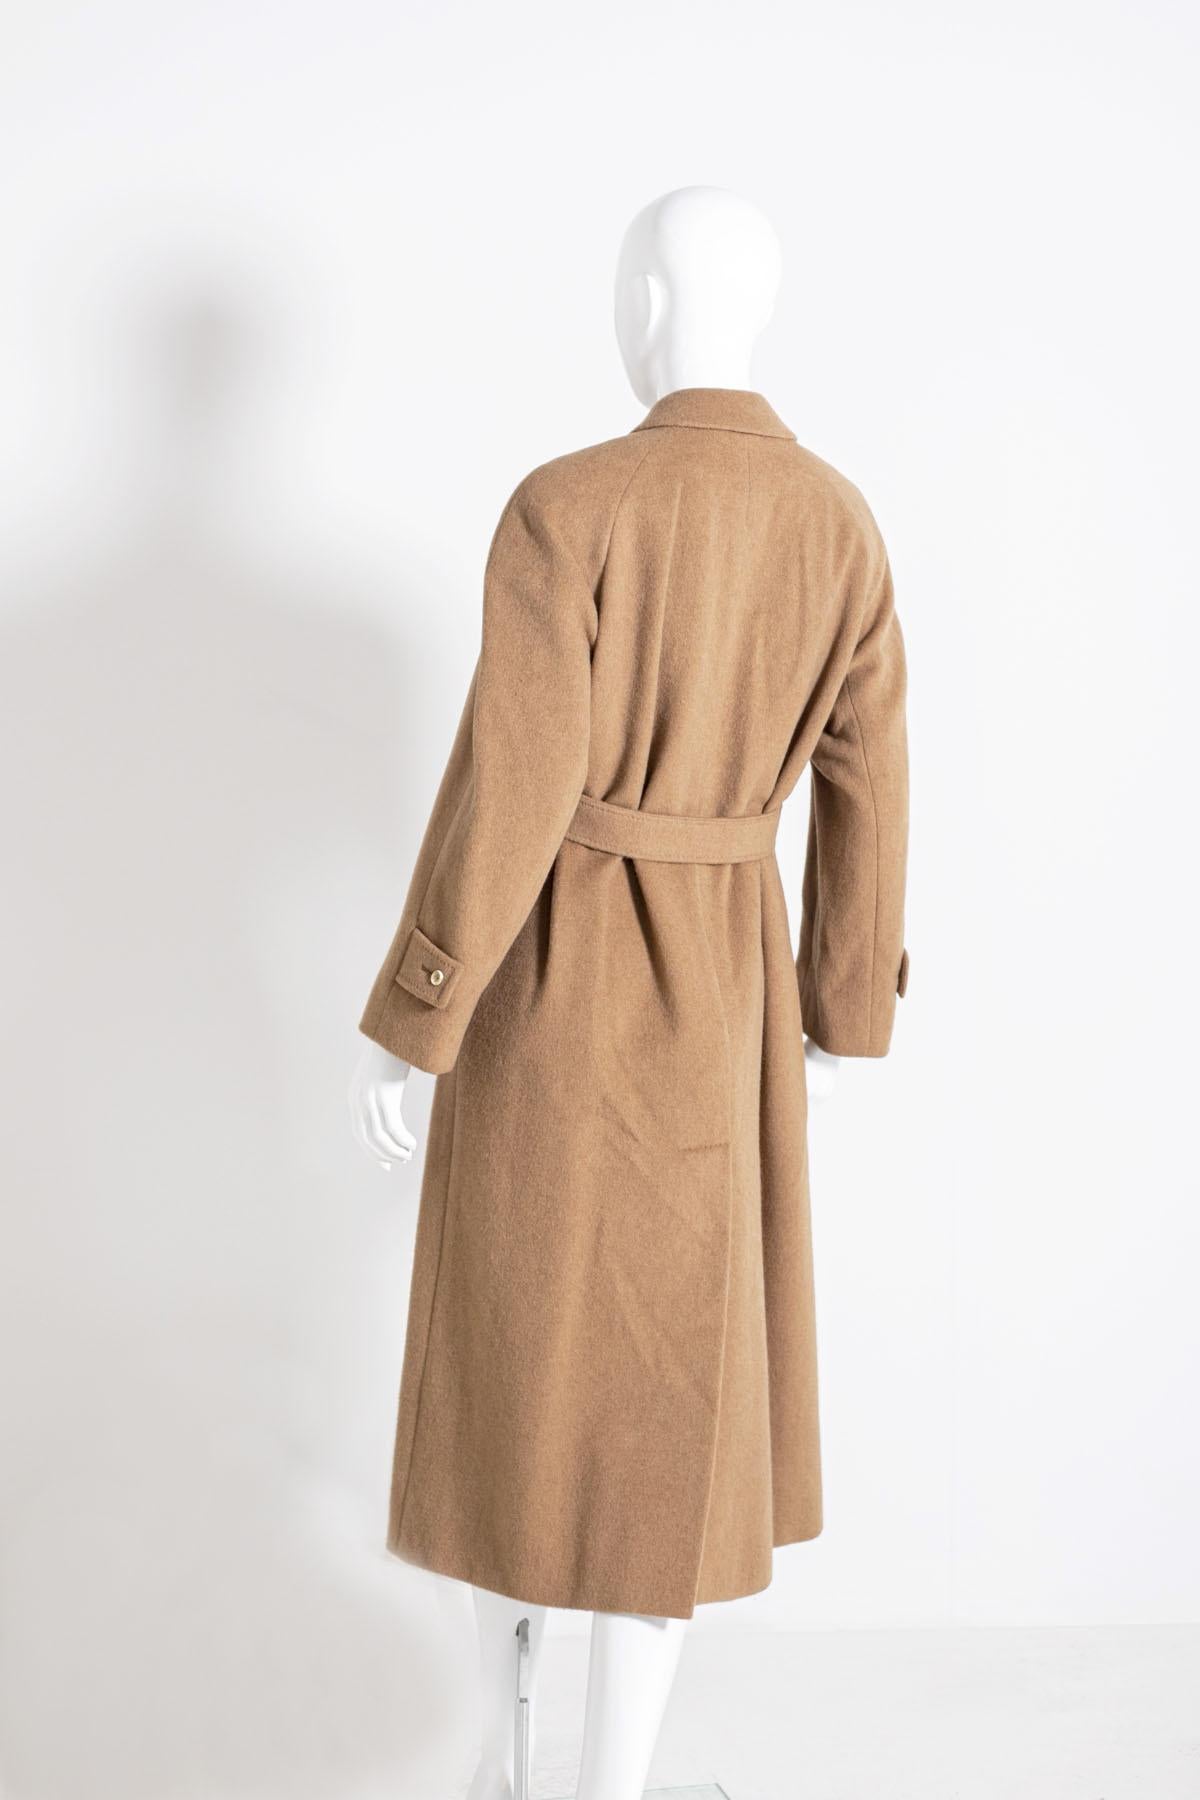 Wonderful woman's coat Aquascutum of the 90s, made of 100% camel hair from which it takes the color.
Its line is classic, with five buttons on the front and two comfortable side pockets, ankle-length. Inside it is lined with 100% viscose and